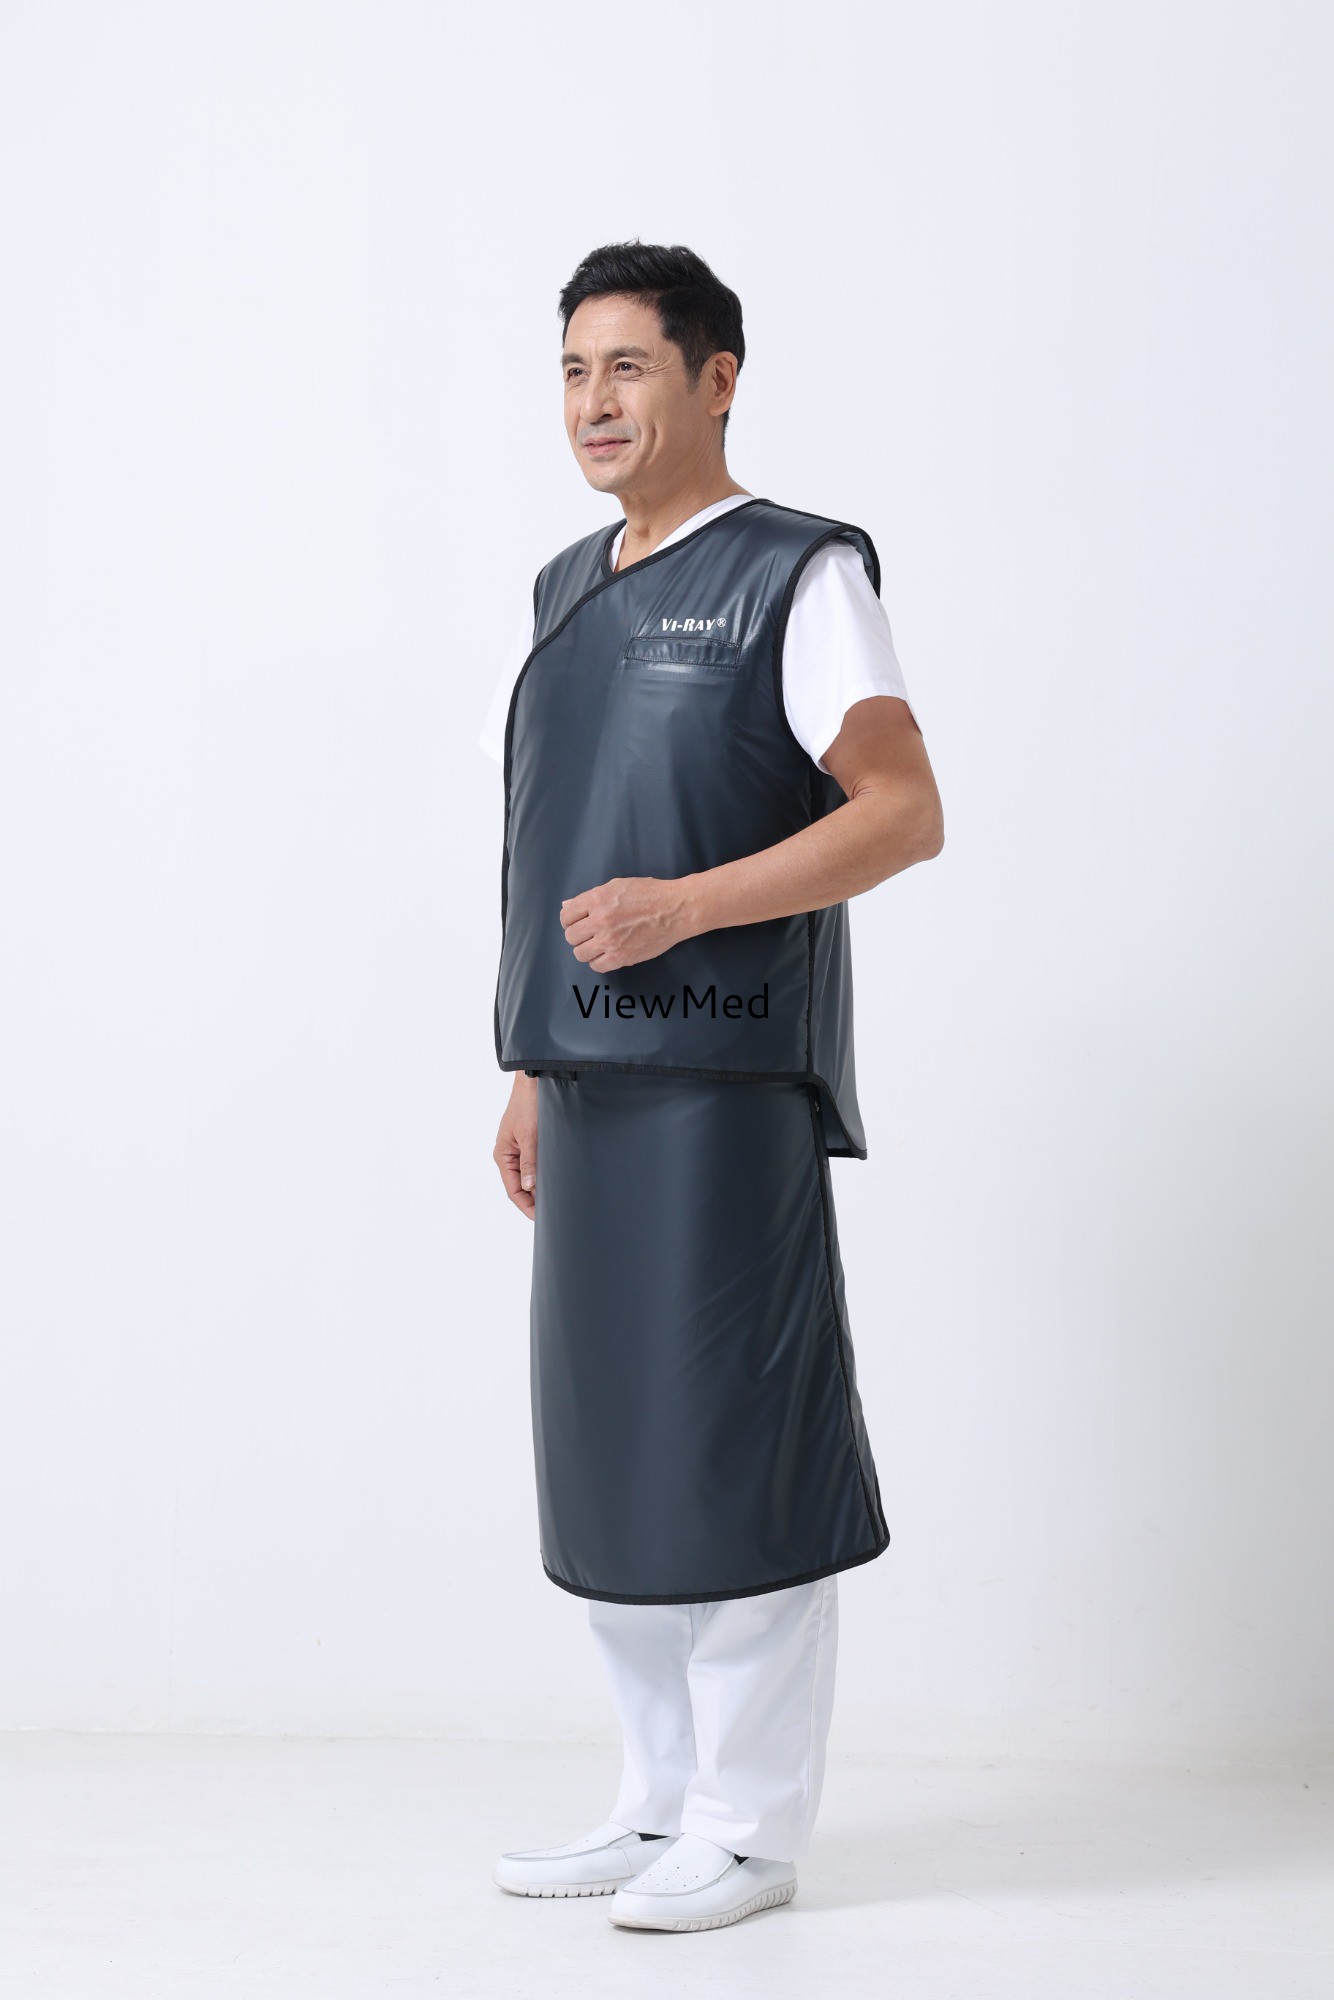 Cloth-Embedded Vest and Skirt Apron